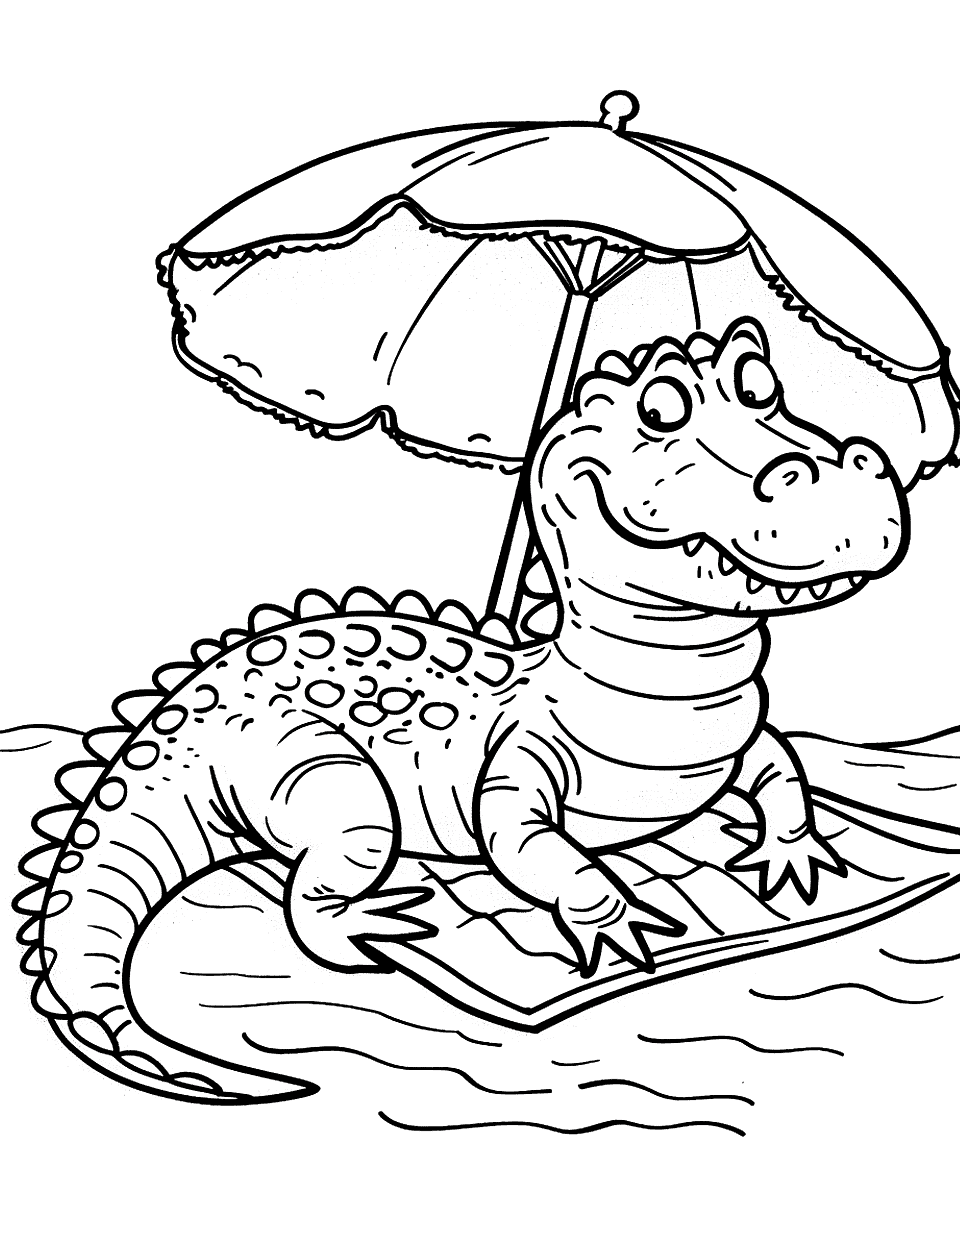 Summer Alligator at the Beach Coloring Page - An alligator lounging on a beach towel under a big umbrella.